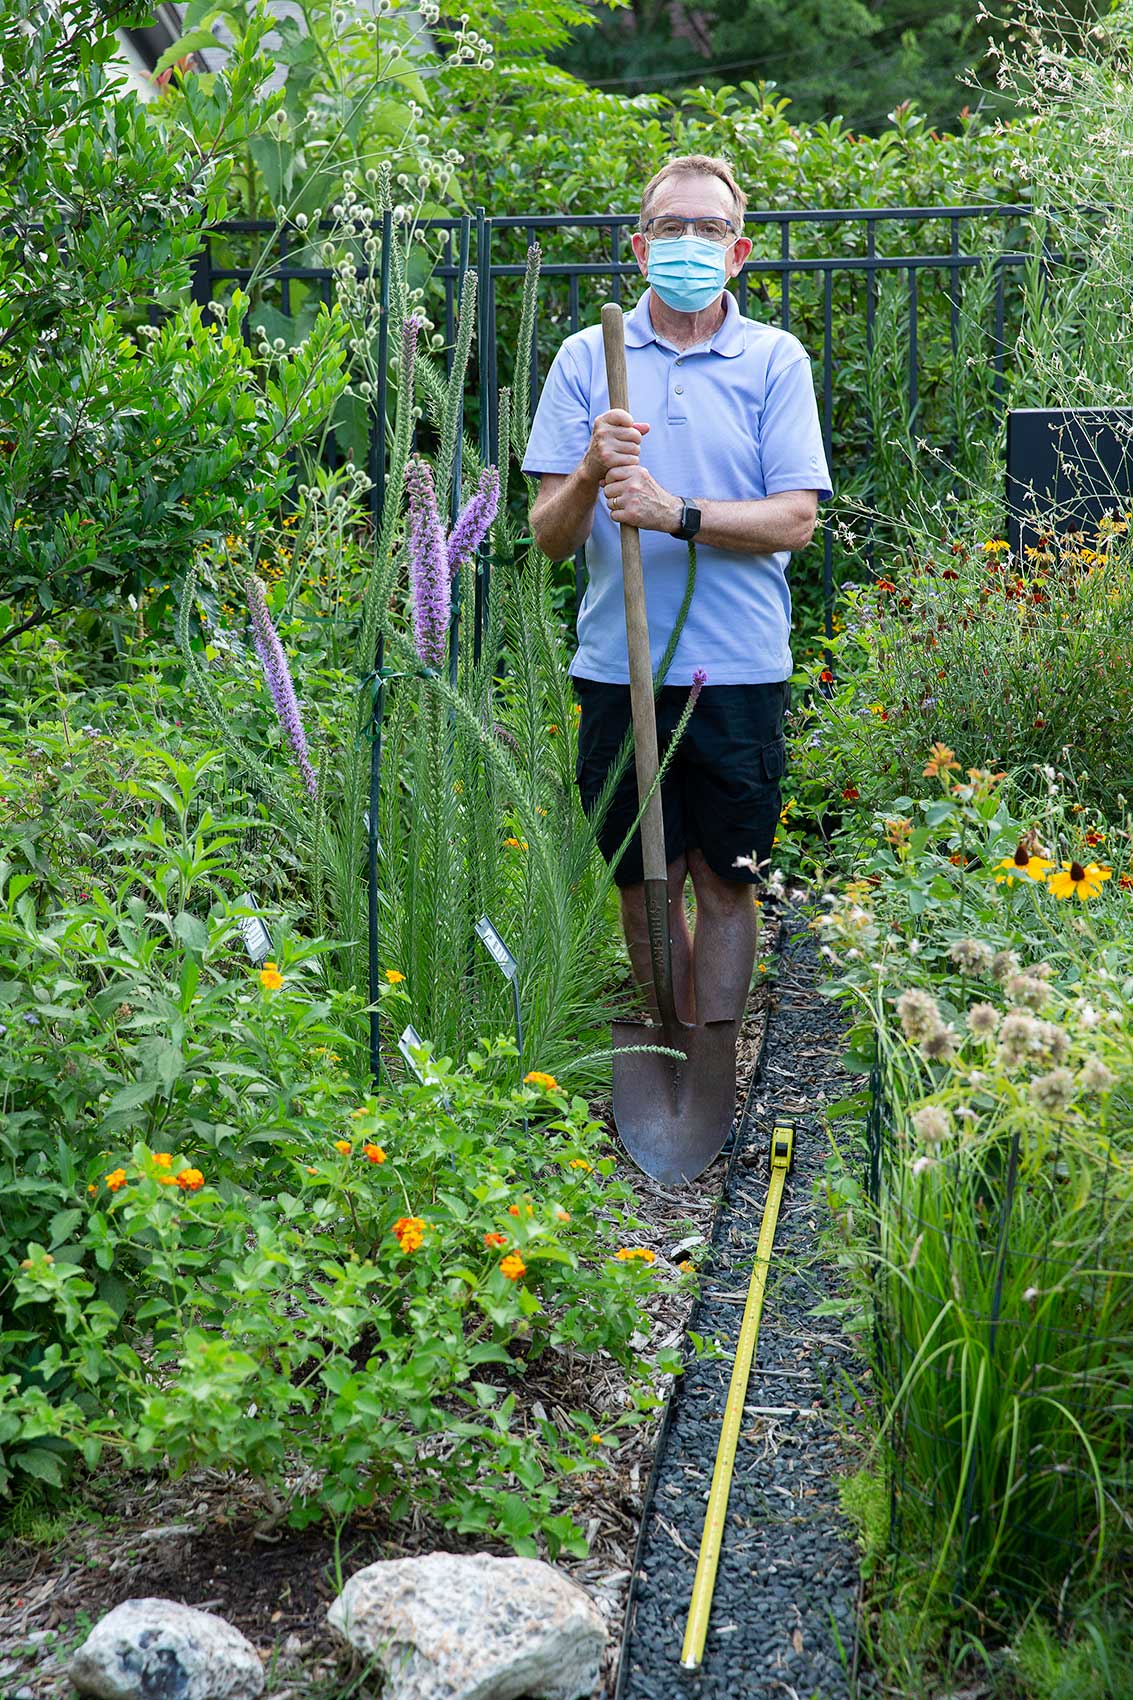 A man wearing a mask and holding a shovel works in his garden with a long tape measure as a symbol of Covid-19 social distance